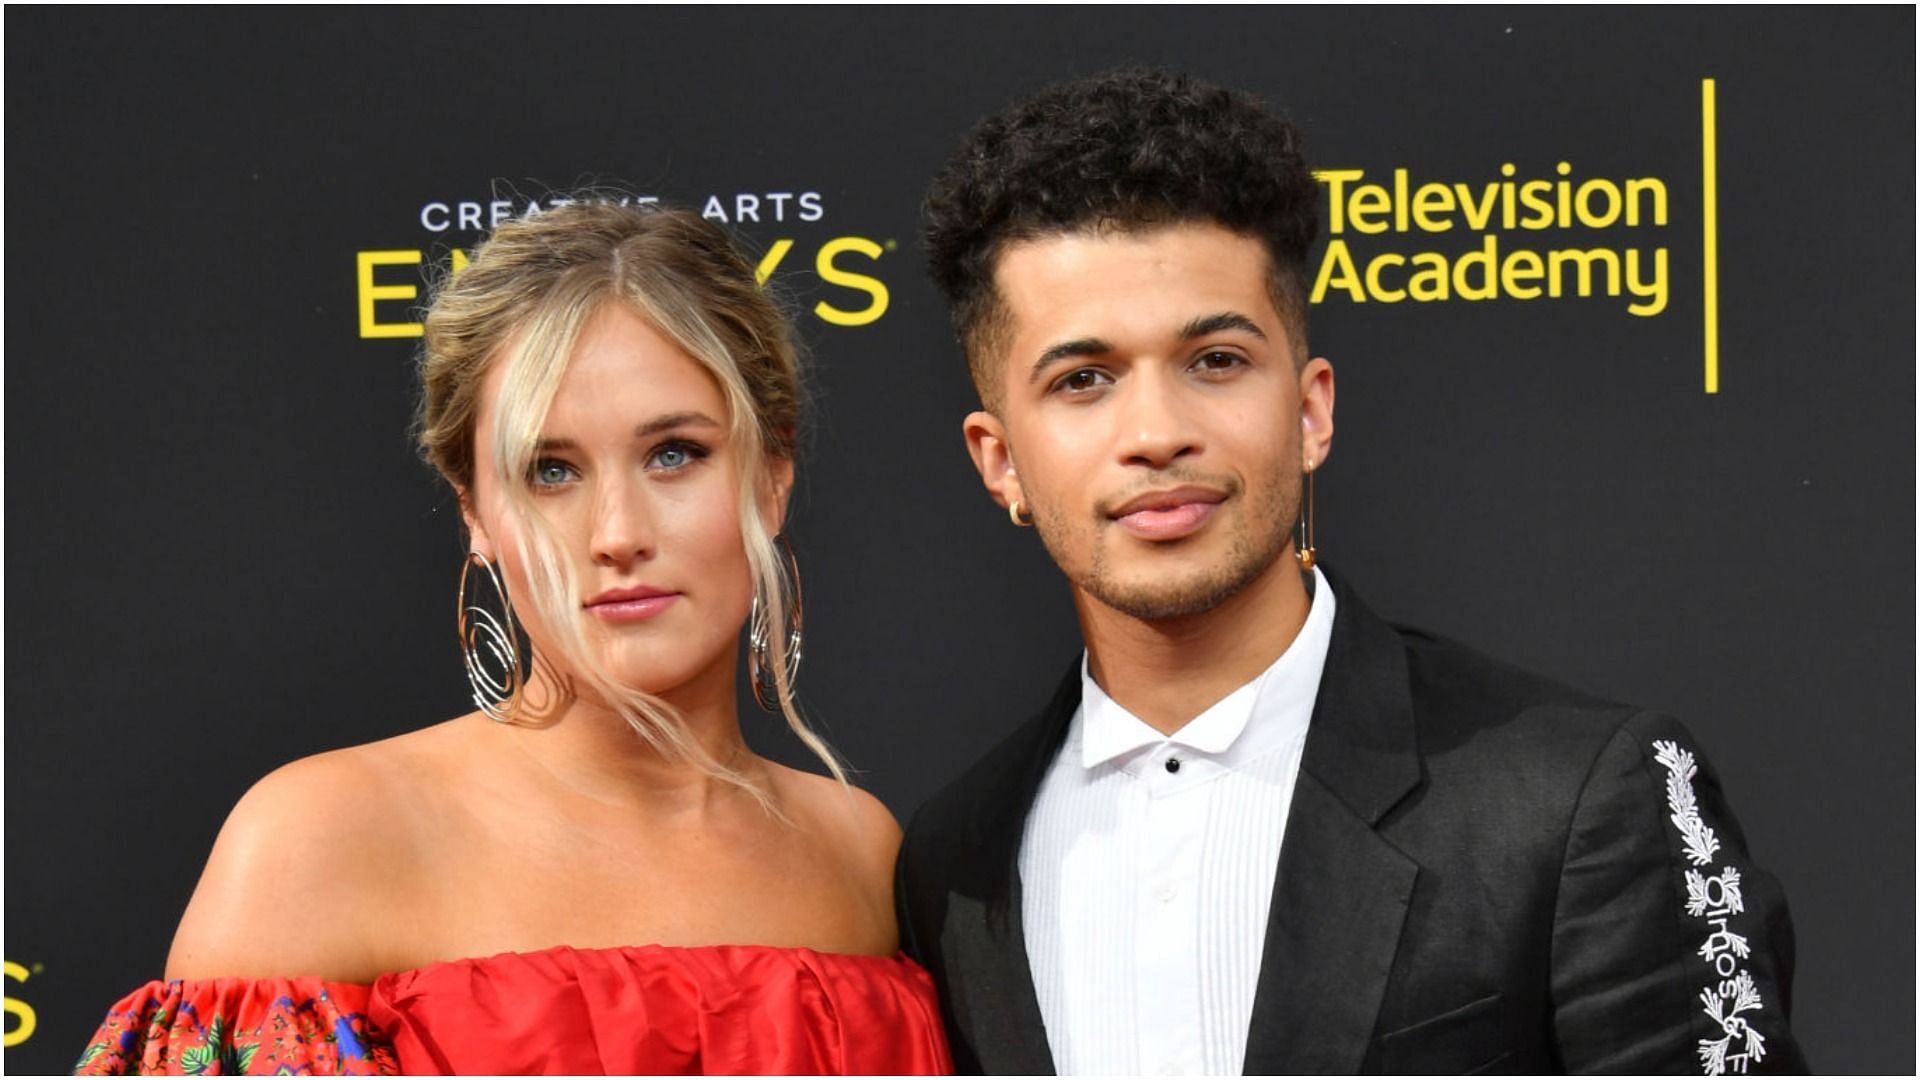 Ellie Woods and Jordan Fisher attend the 2019 Creative Arts Emmy Awards (Image by Amy Sussman via Getty Images)